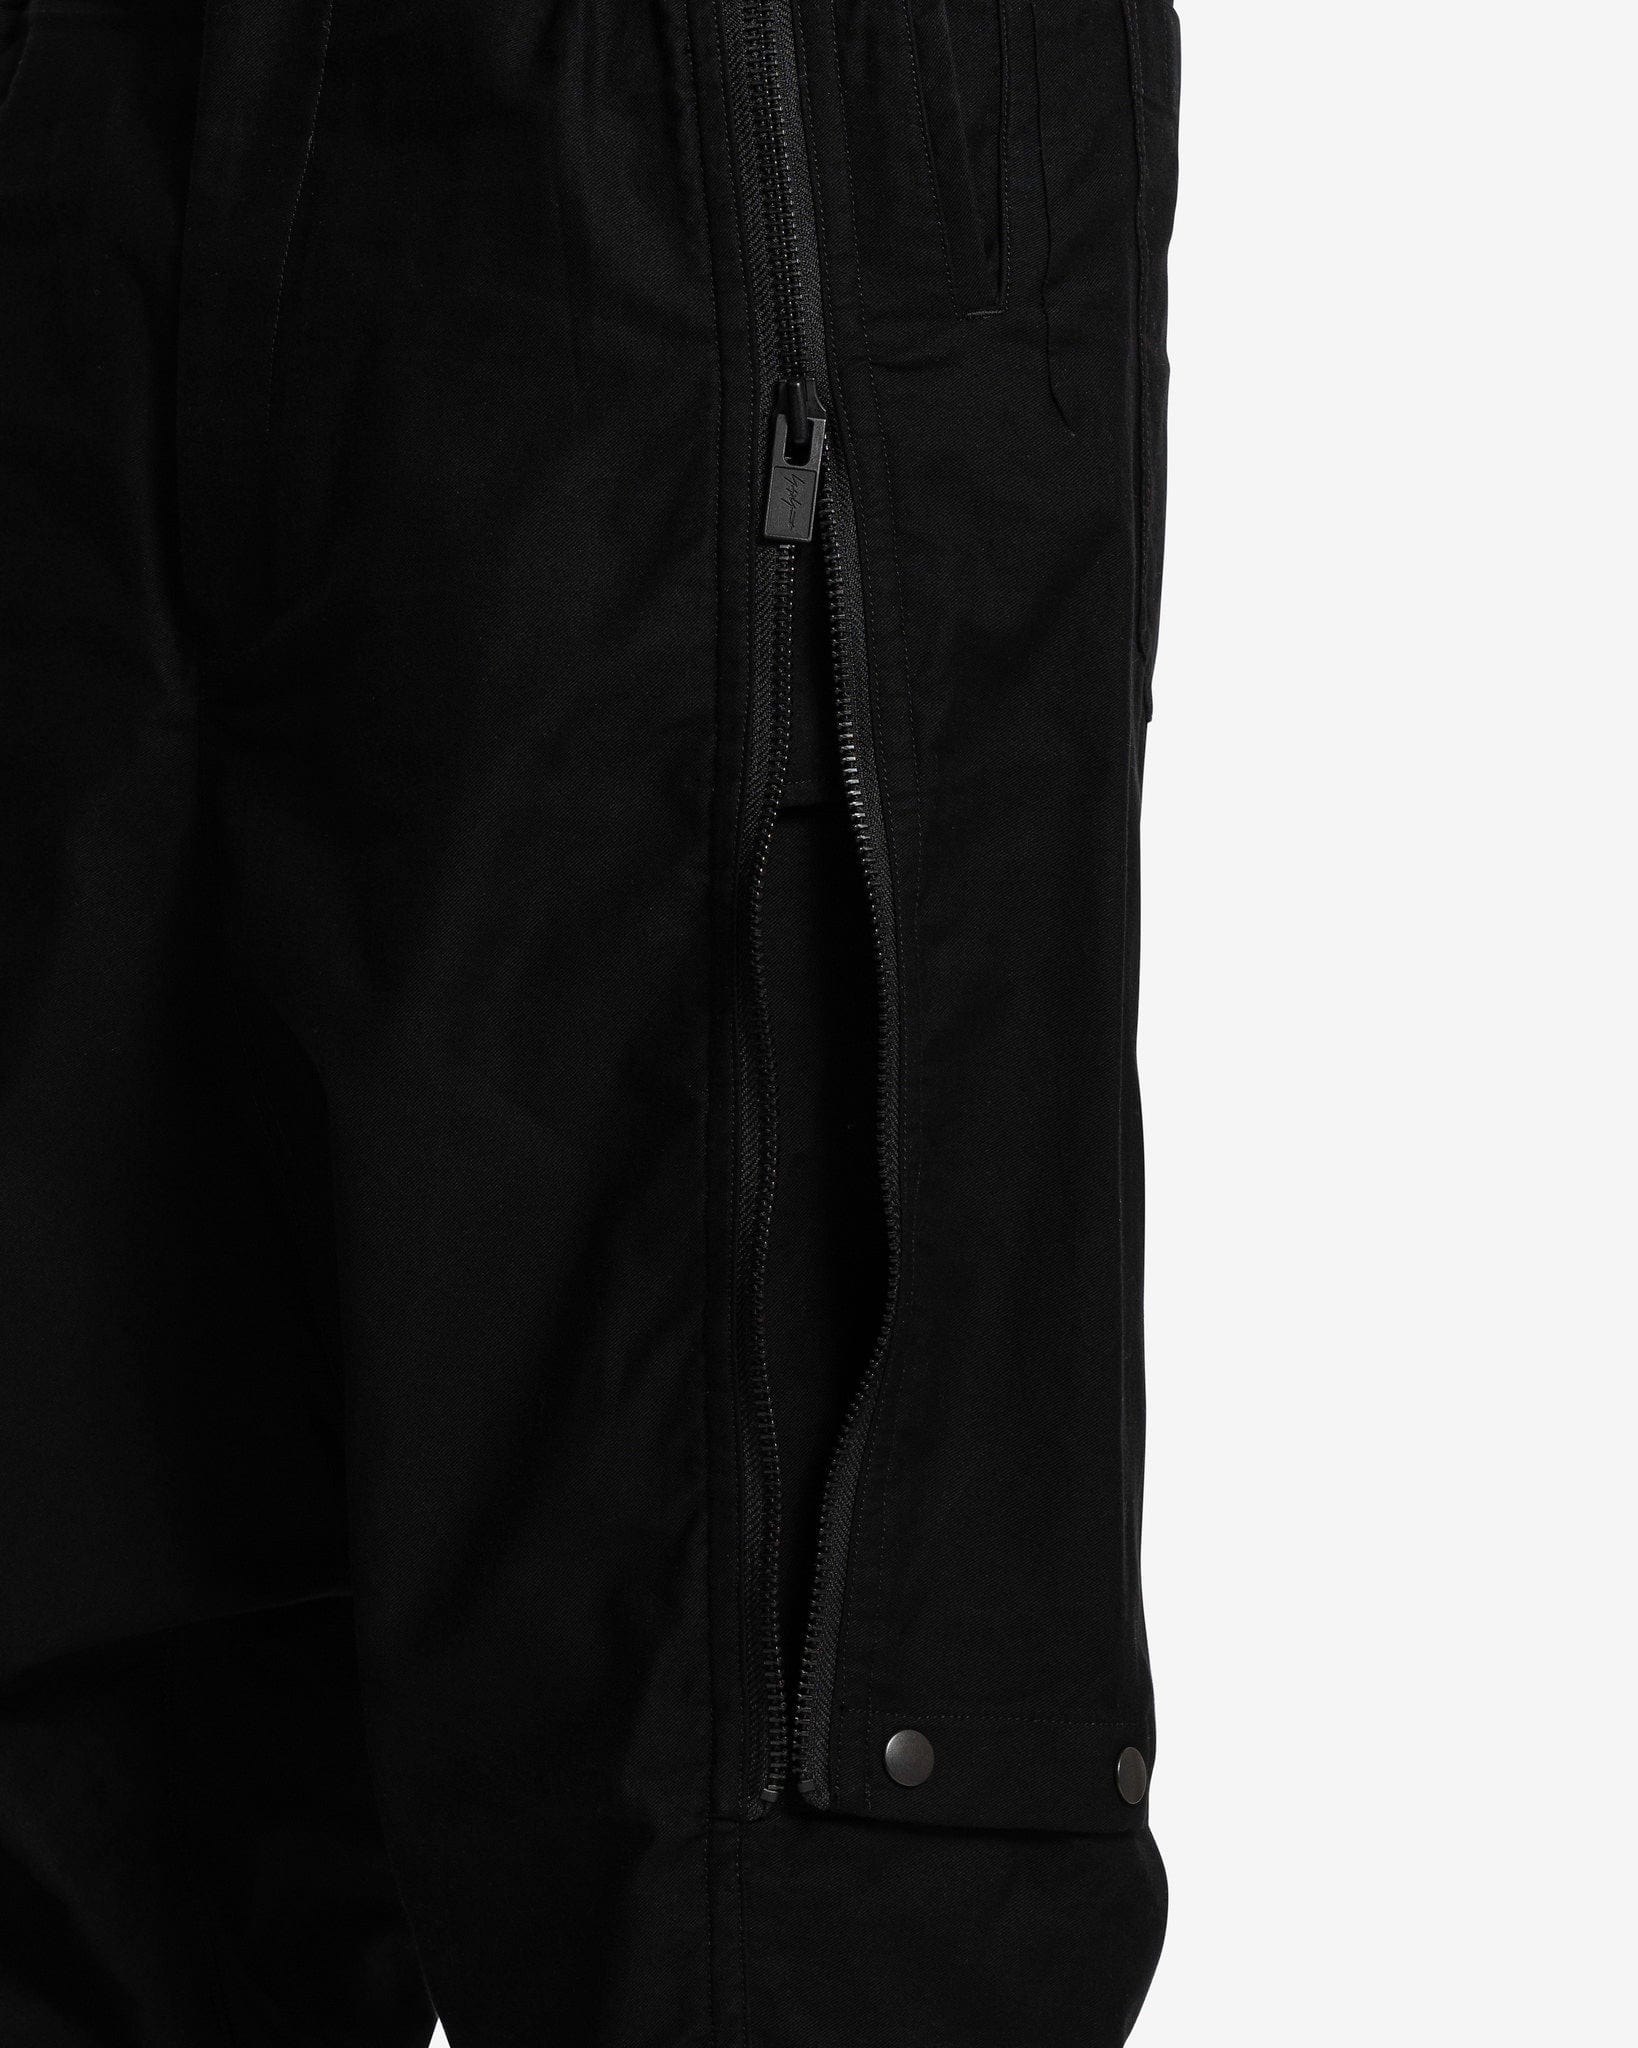 Cotton Twill Sarouel Pants with Zipper Details in Black – SVRN